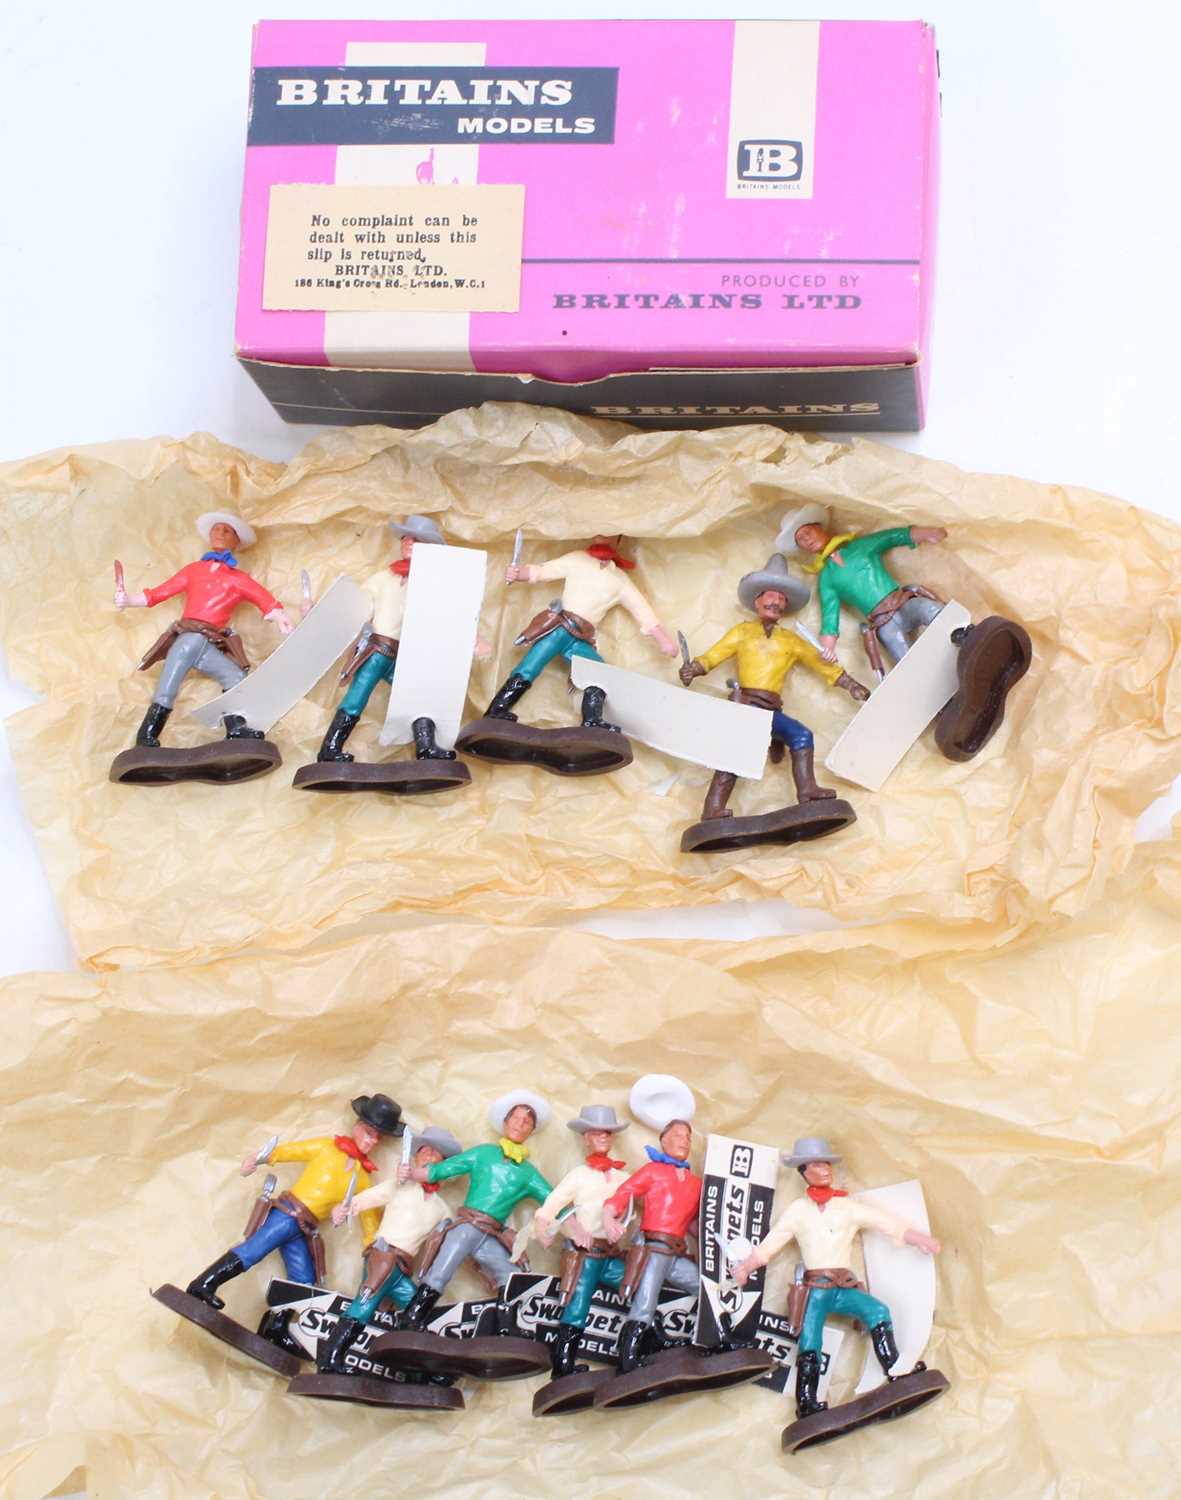 A Britains Swoppet series No. 659, 11 of 12 trade box of No. 659 knife fighter figures, housed in